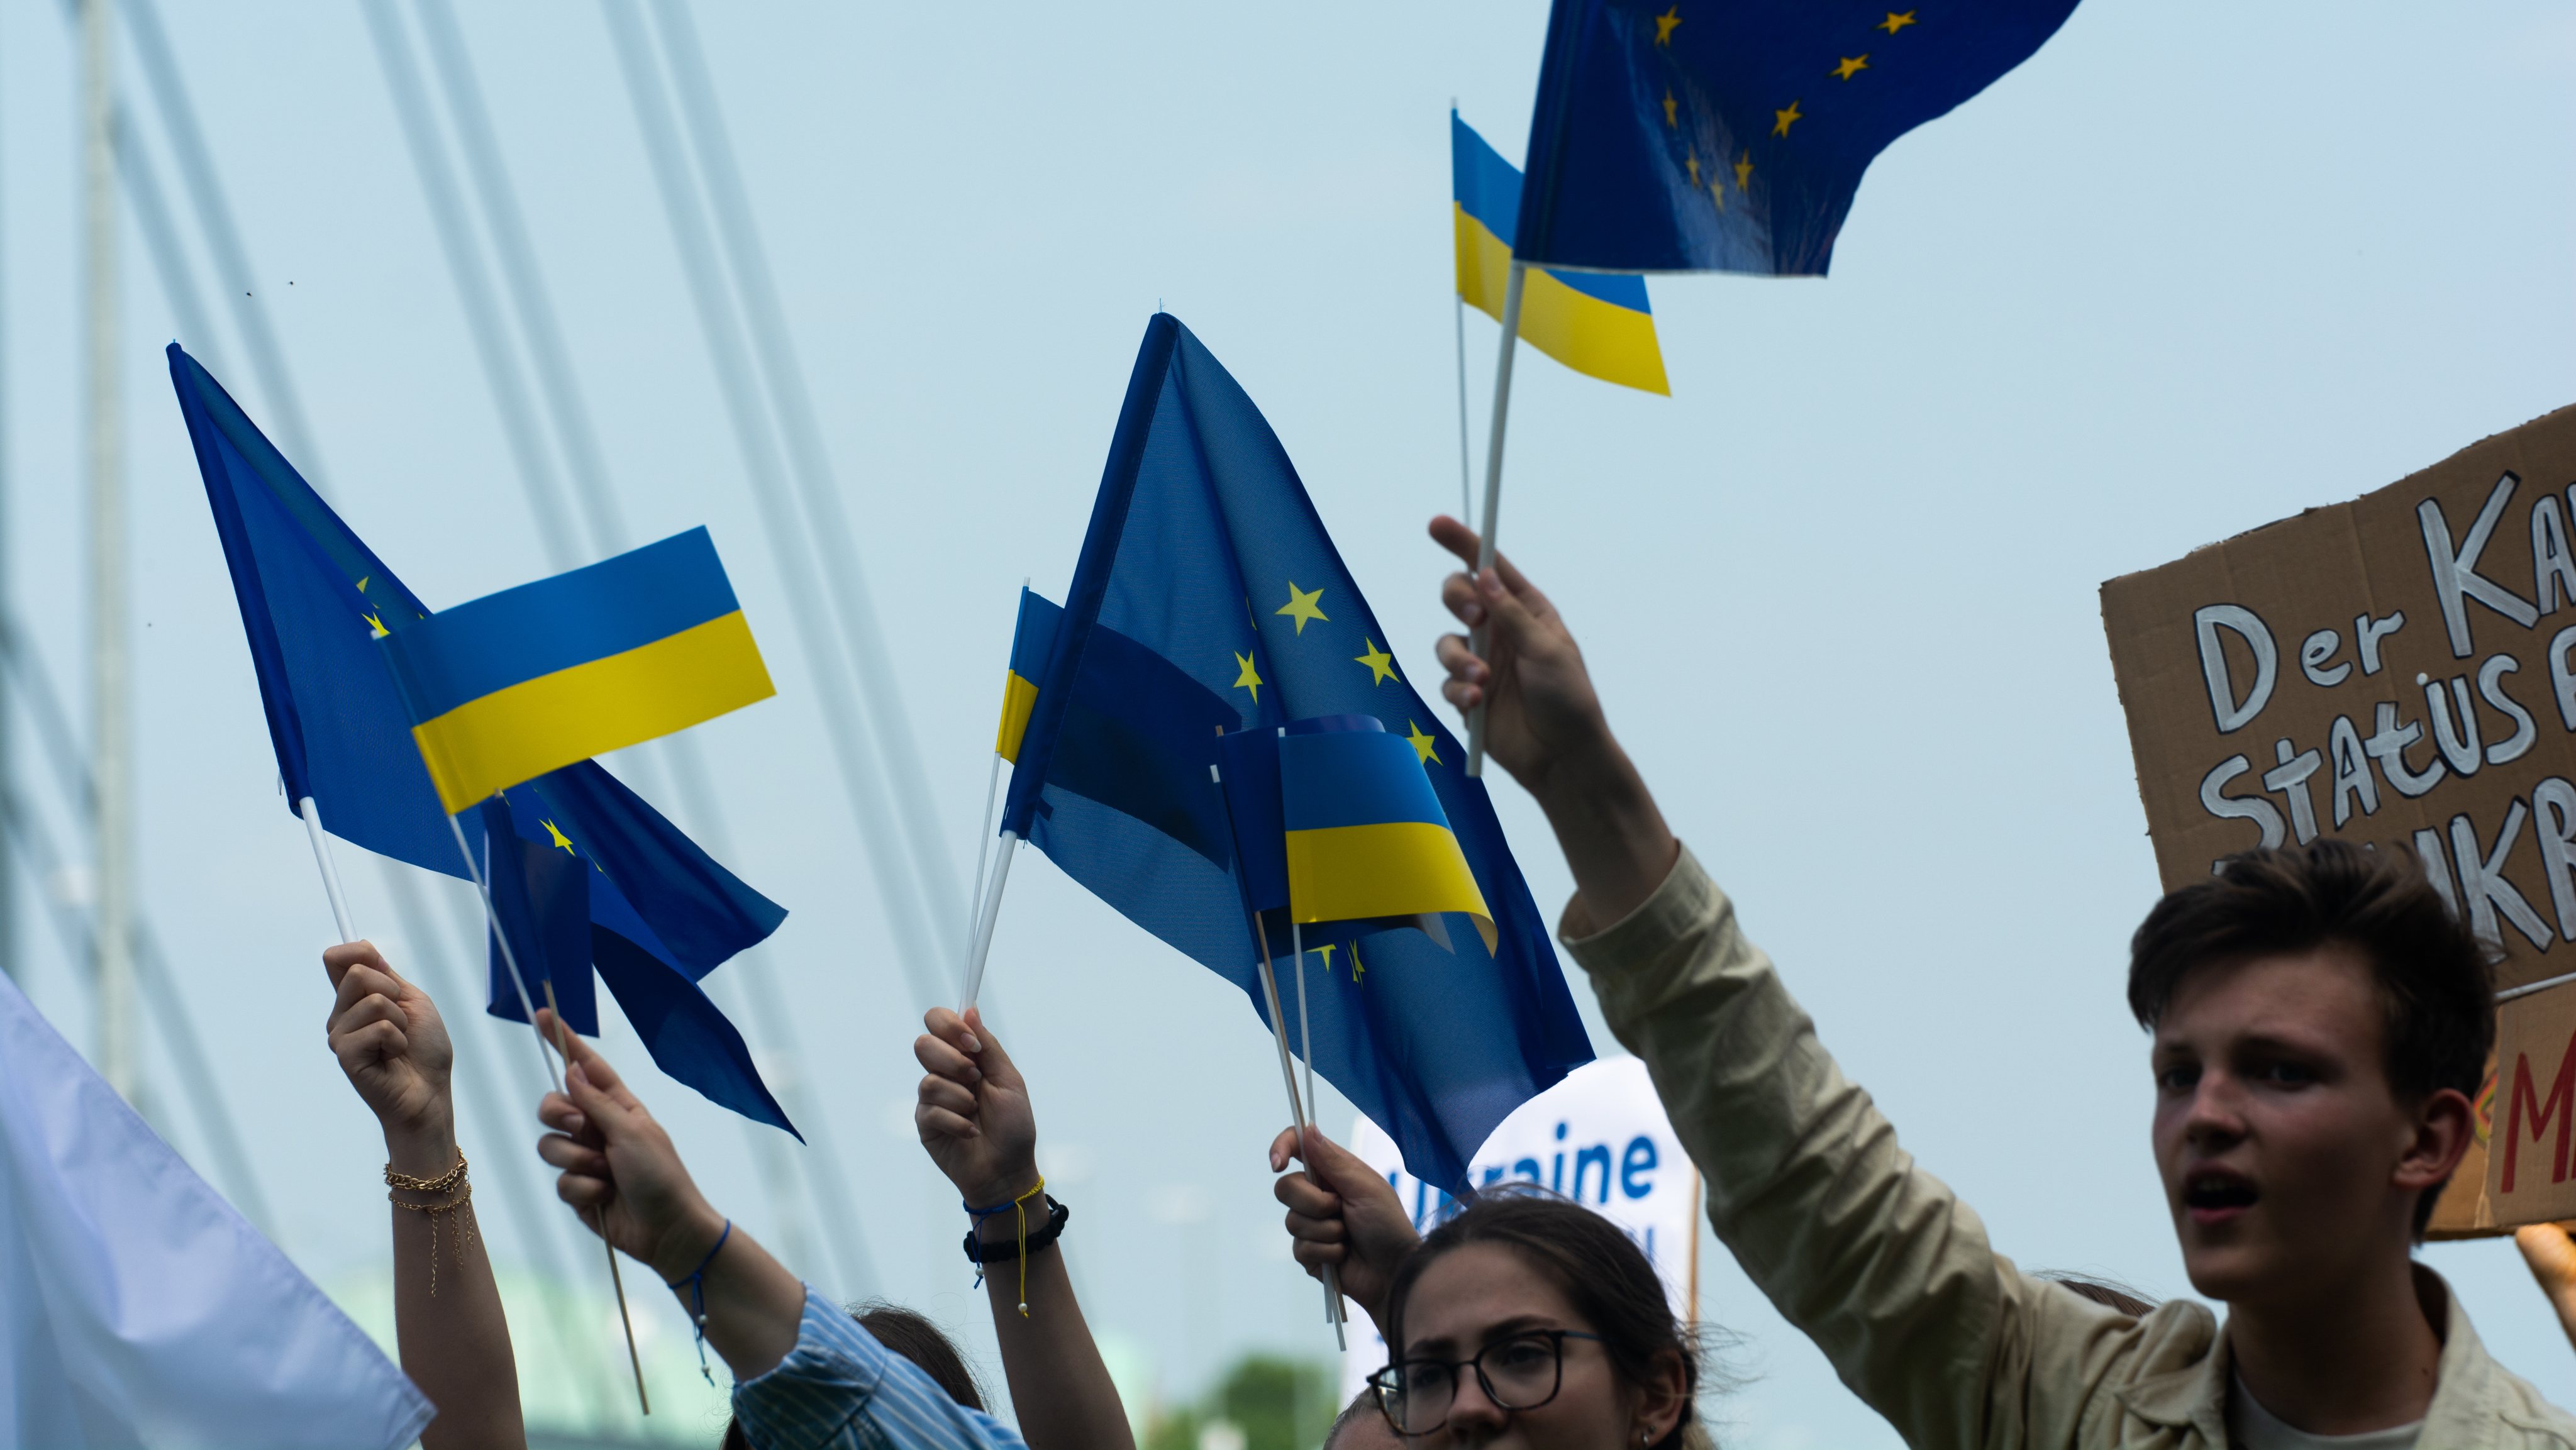 March For Supporting Ukraine For EU Candidate Membership In Düsseldorf